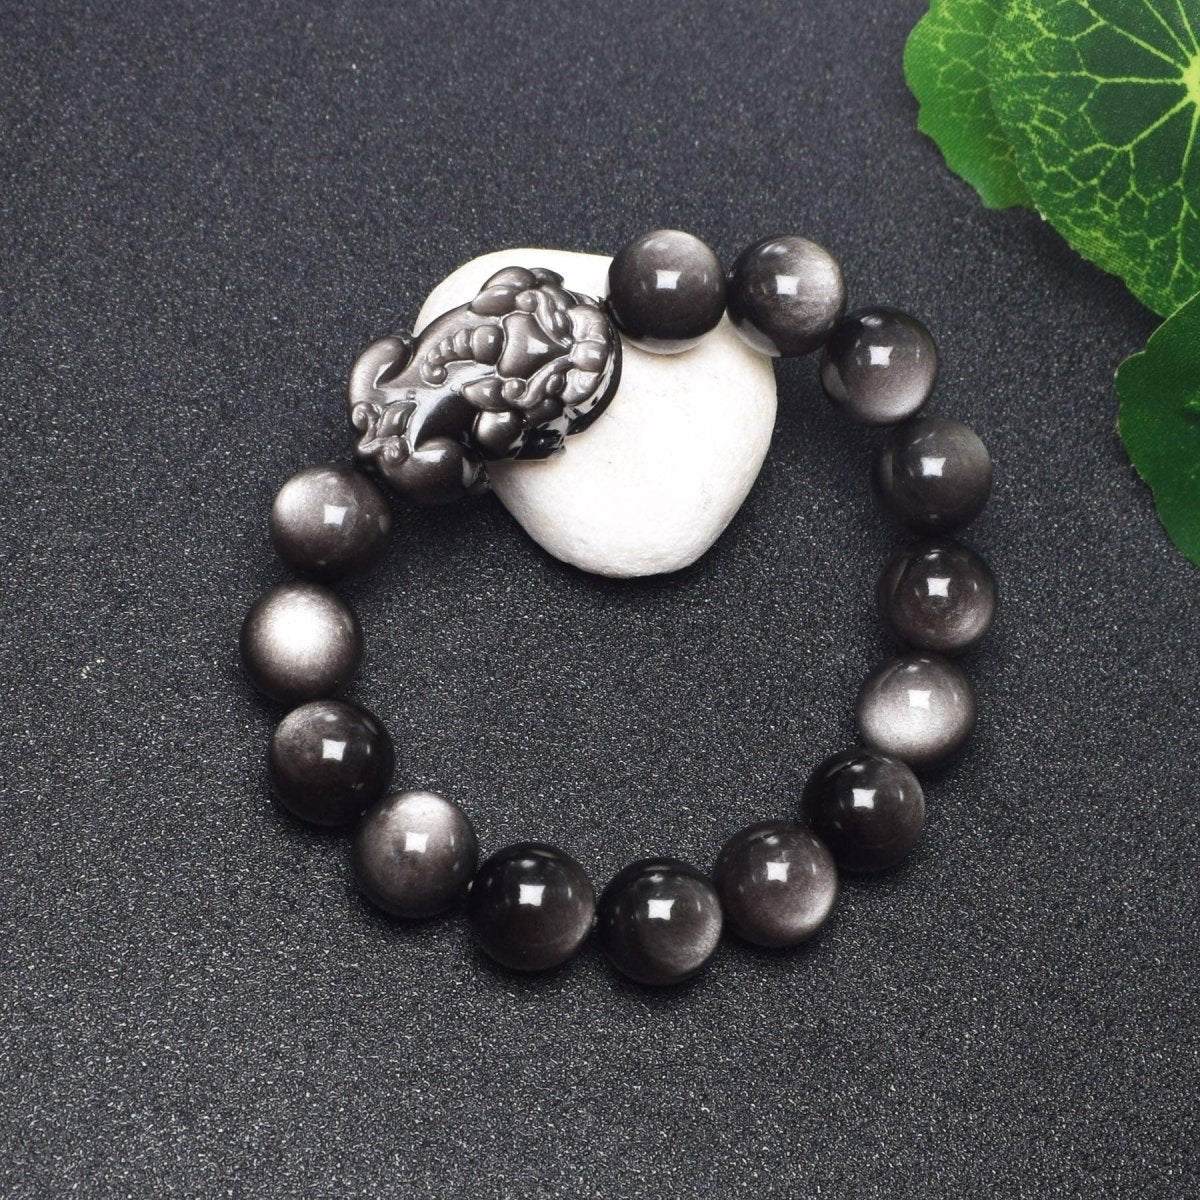 Rare Silver & Stone Pixiu Bracelet: Boost Wealth & Protection | Higher Frequencies - HigherFrequencies